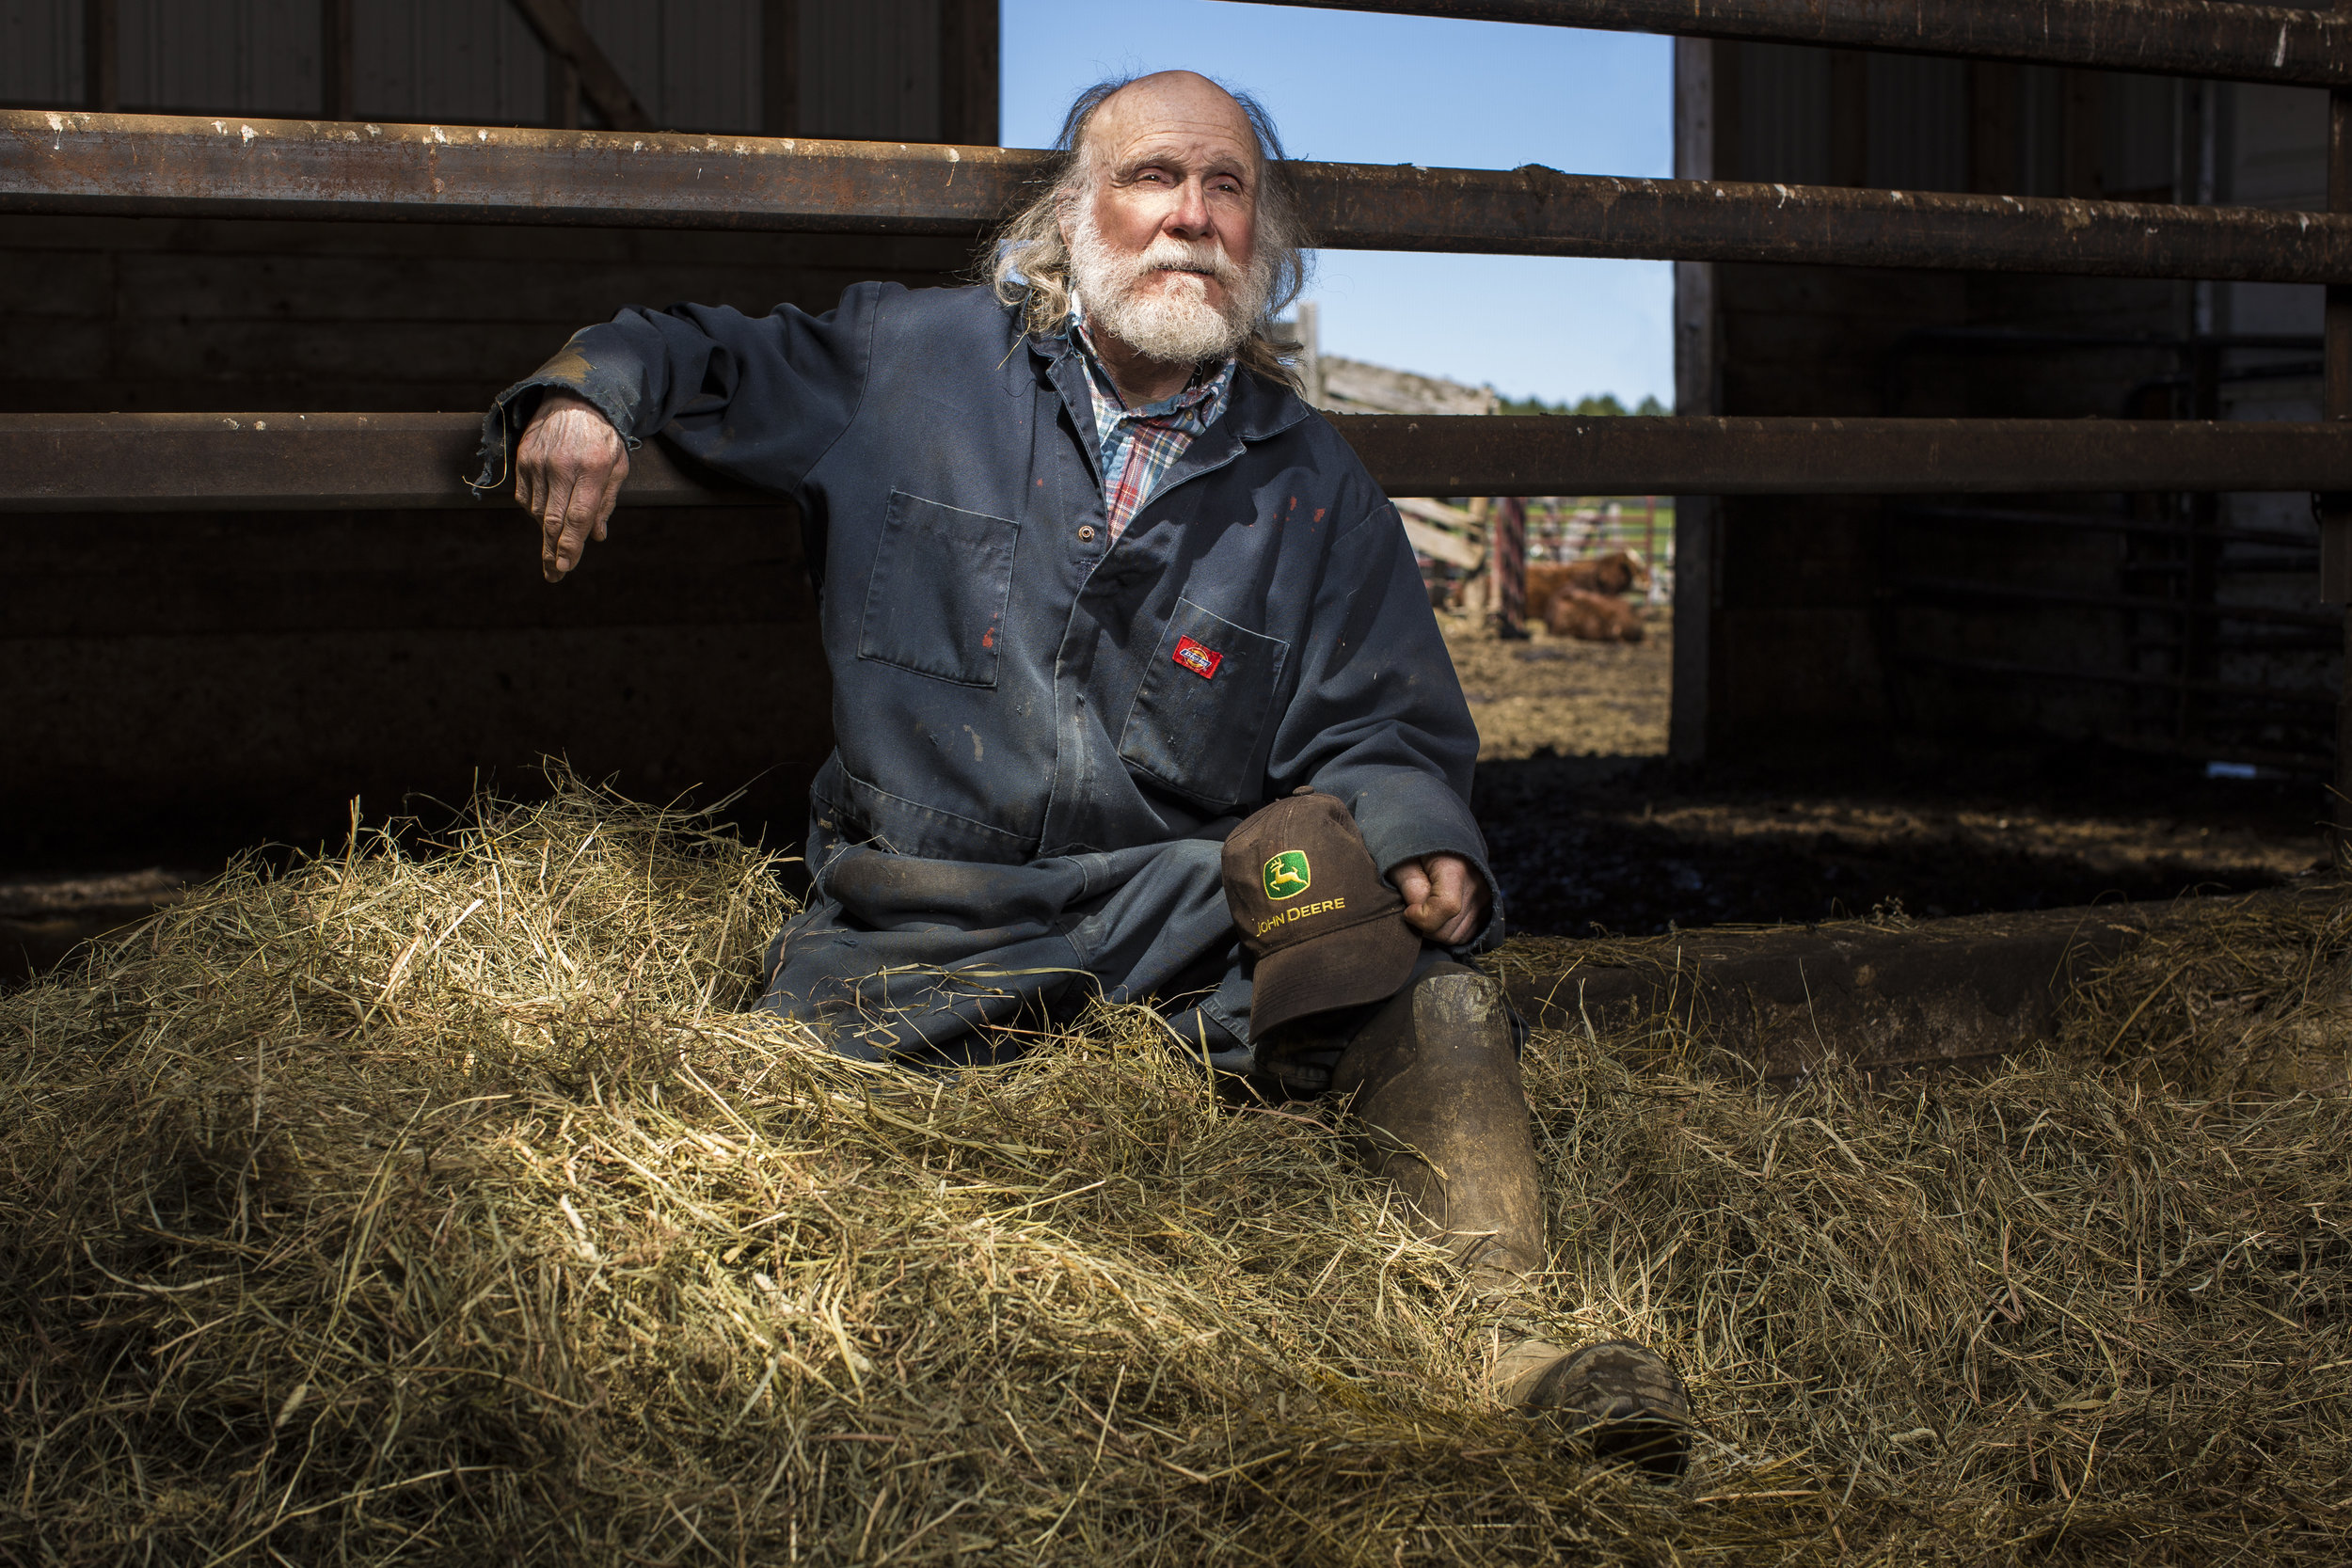  Fred Cookson, 76, of Dover-Foxcroft, Maine was raised just a few miles from where his home and farm of more than 200 acres now sit, and he has lived a life committed to hard work on the farm and in the classroom. He taught high school math and scien